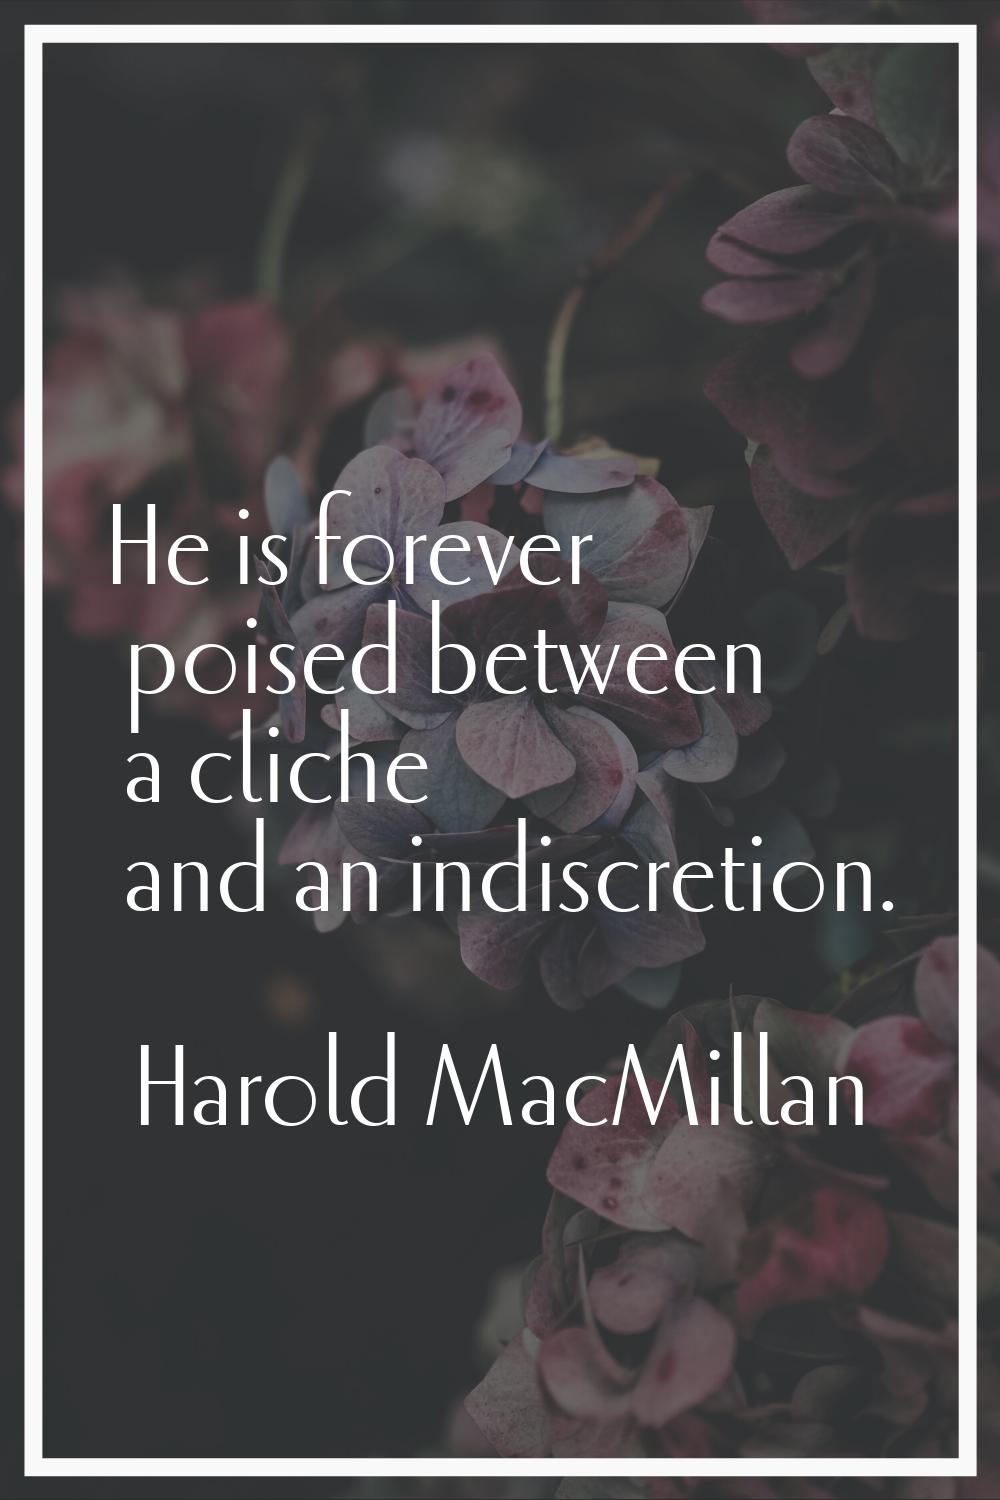 He is forever poised between a cliche and an indiscretion.